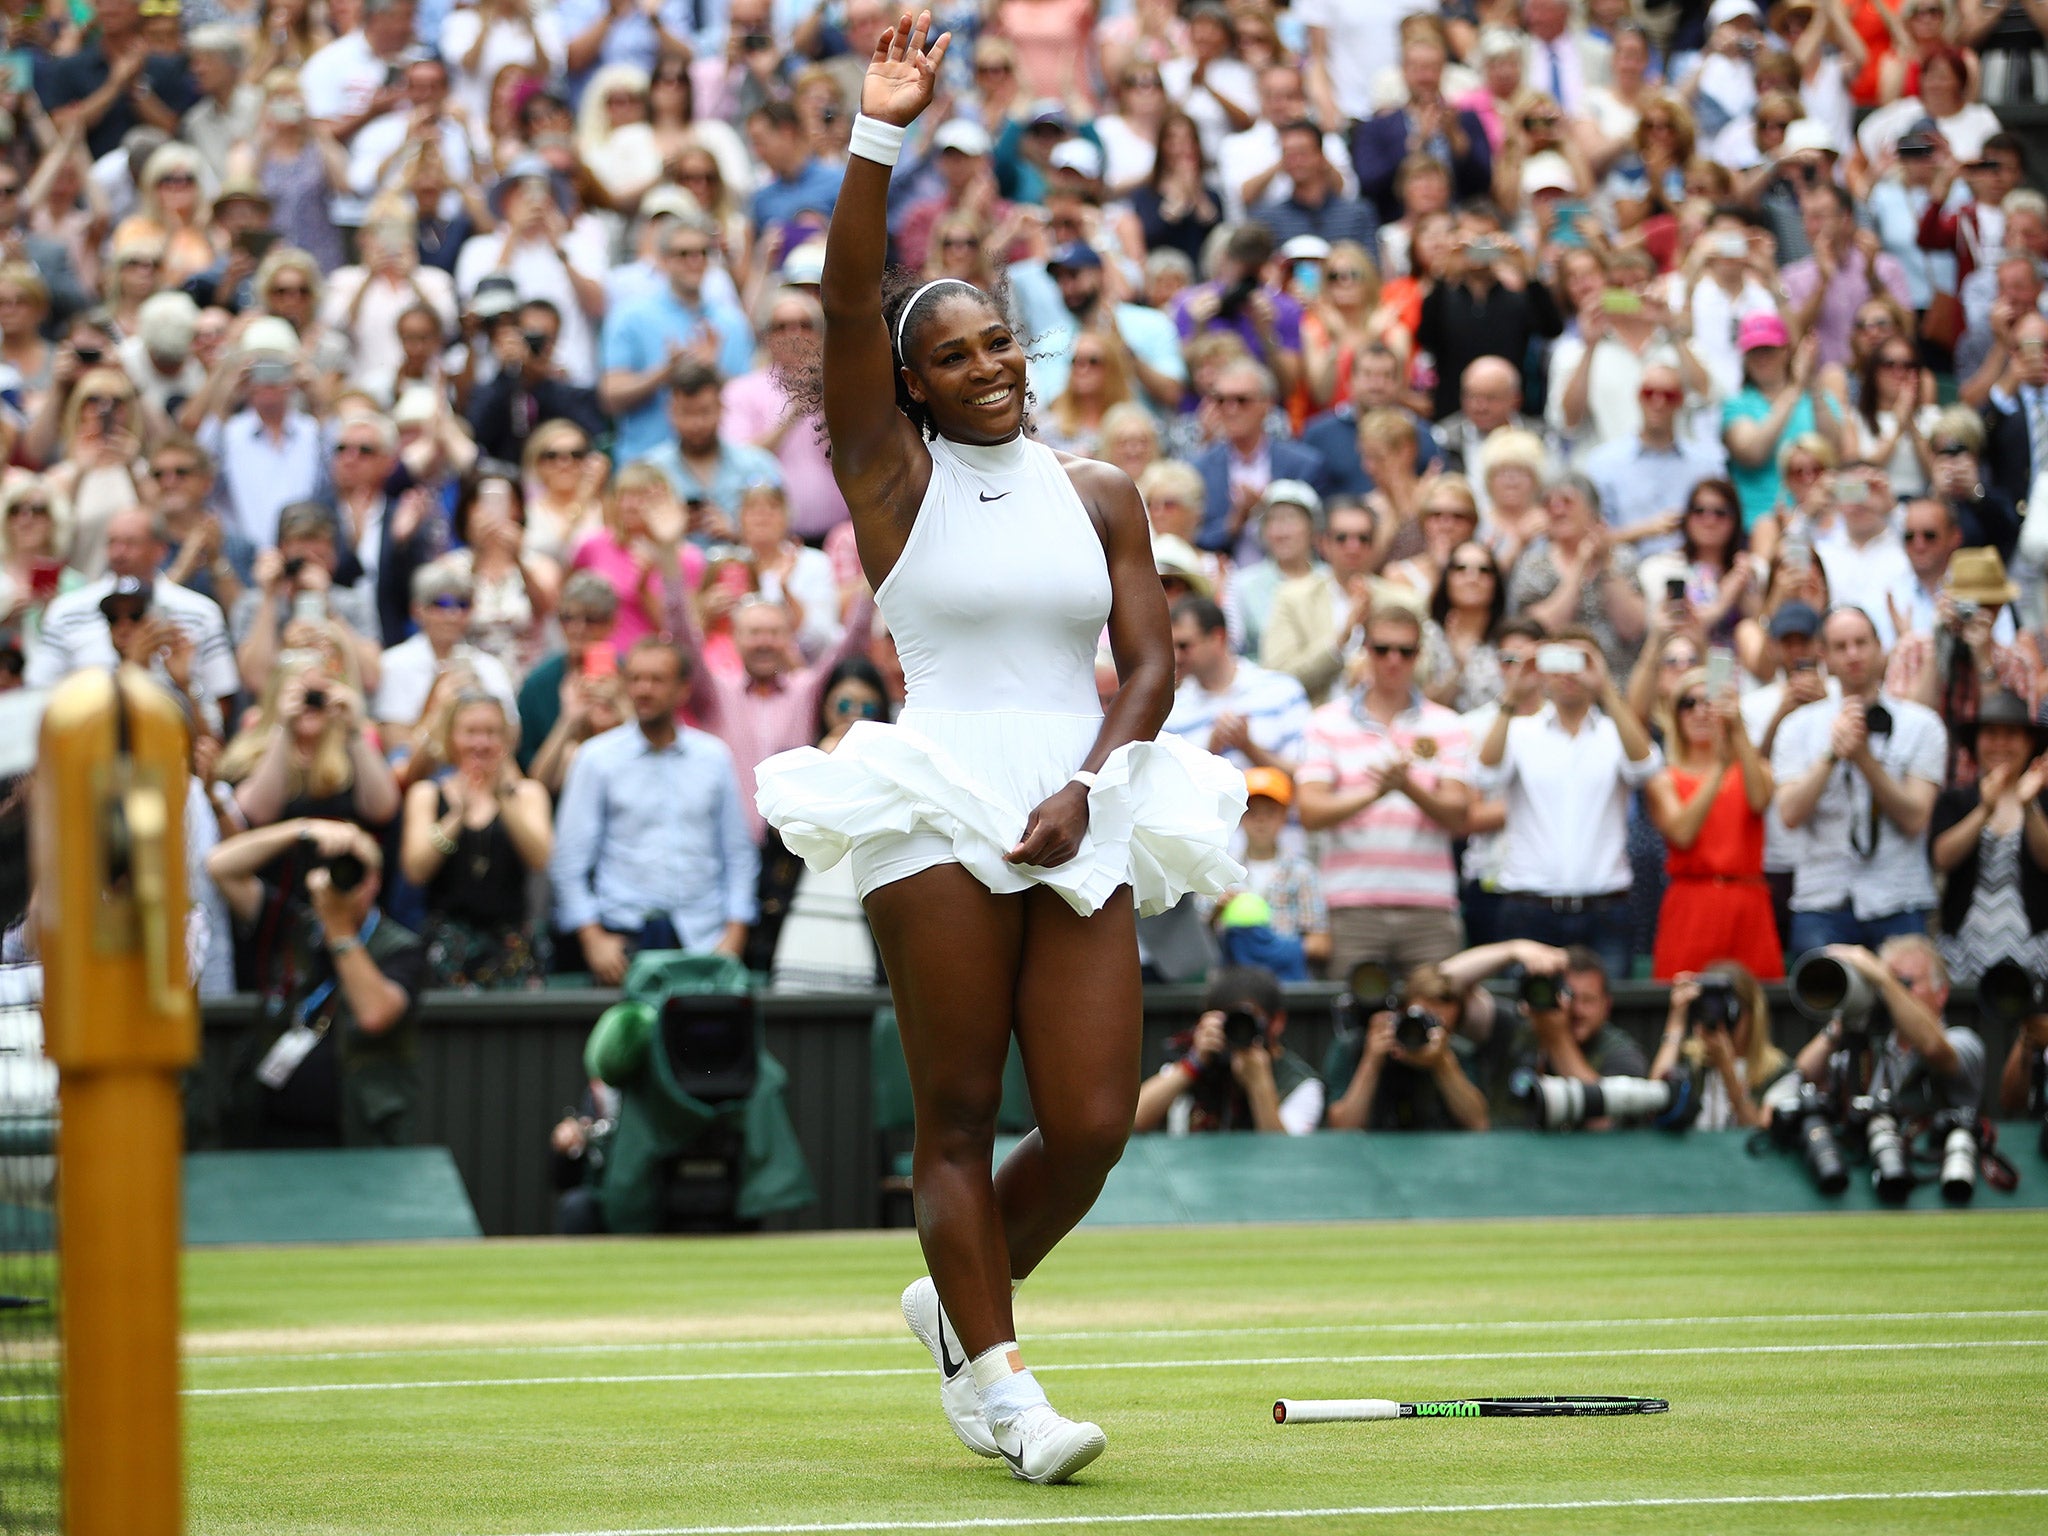 Wimbledon final live Serena Williams wins seventh title to equal Steffi Graf record after beating Angelique Kerber The Independent The Independent